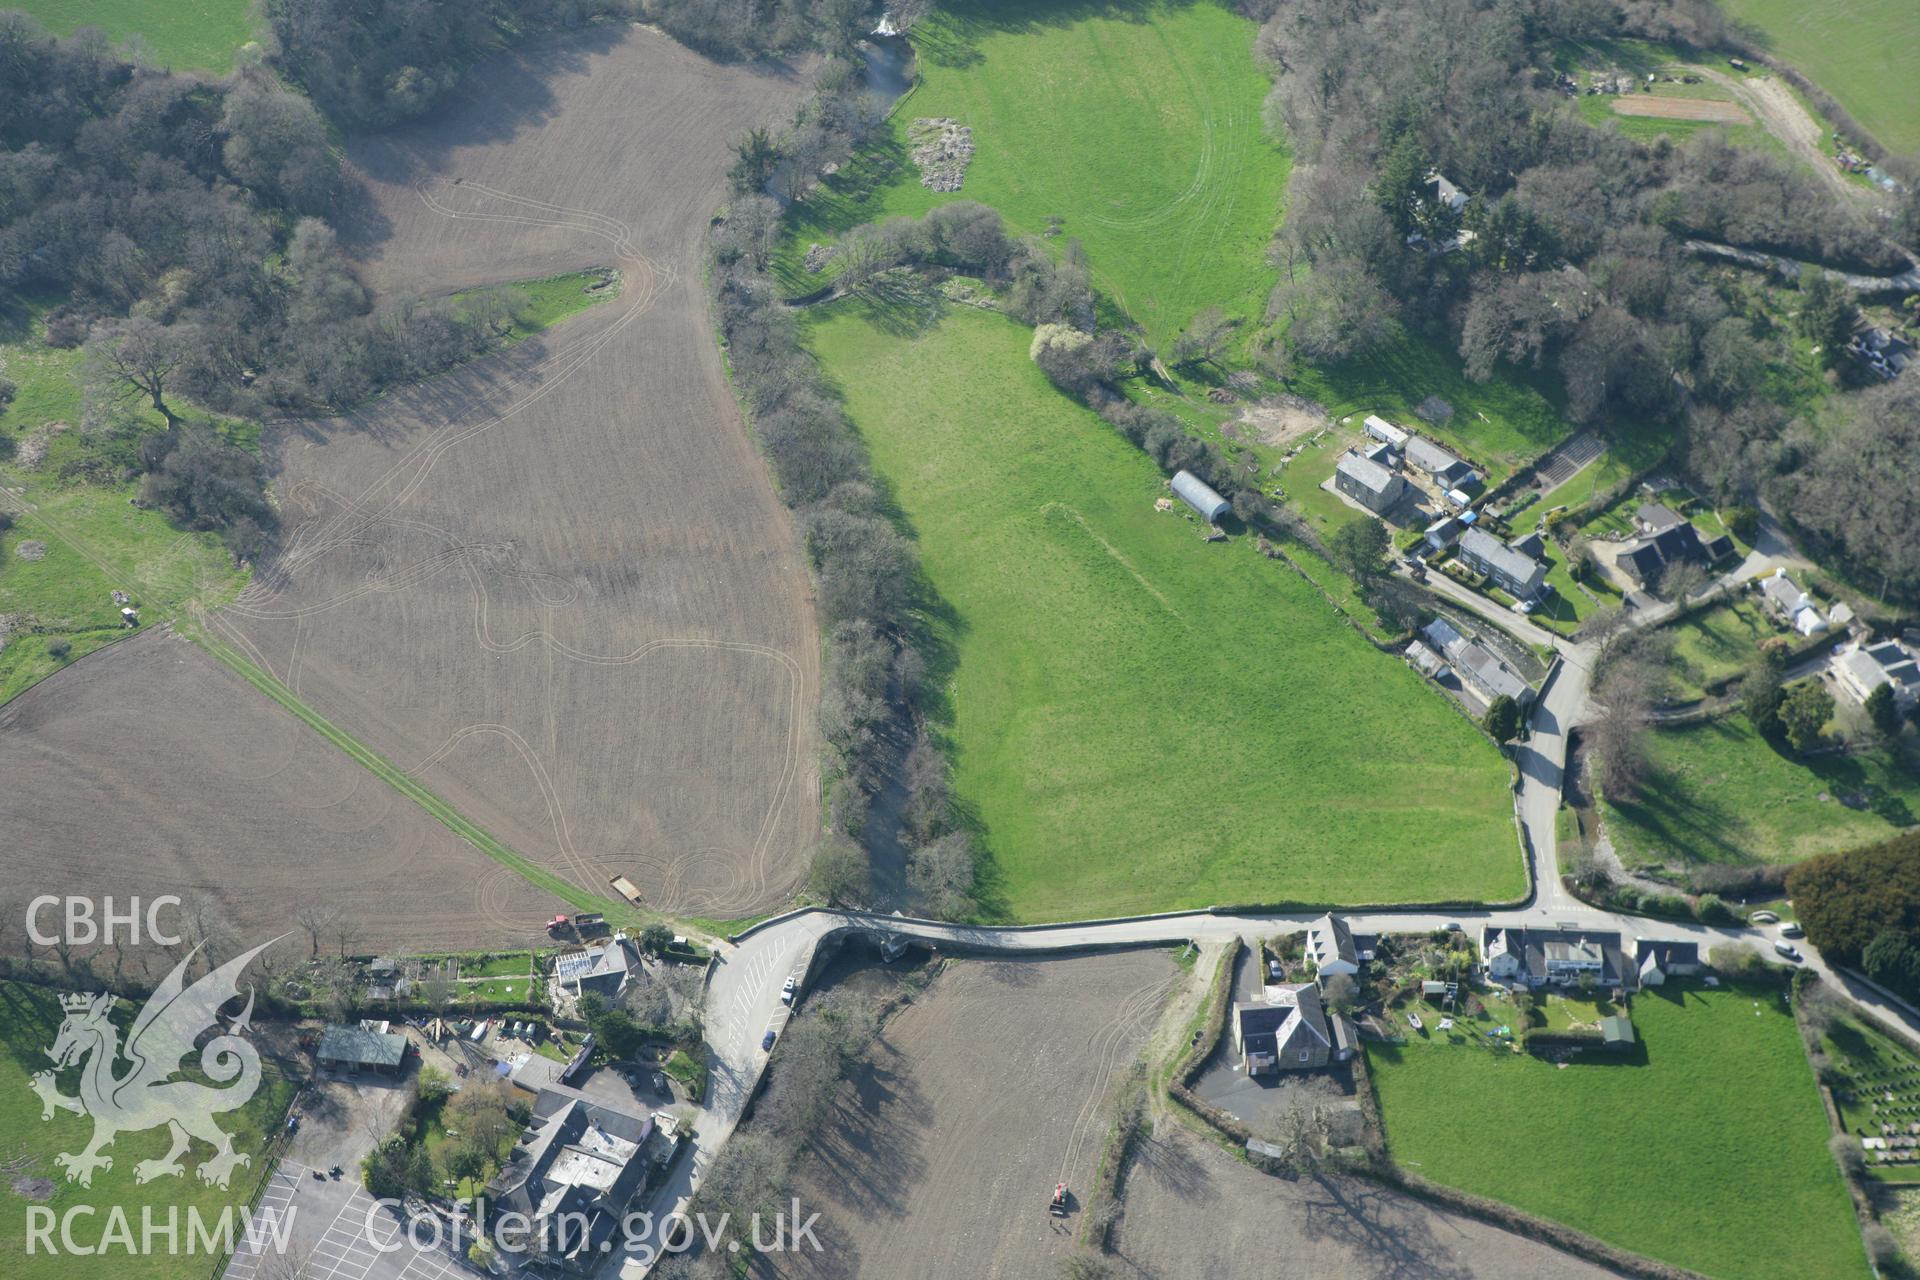 RCAHMW colour oblique aerial photograph of earthworks at Pwll-y-Botel, Nevern. Taken on 13 April 2010 by Toby Driver